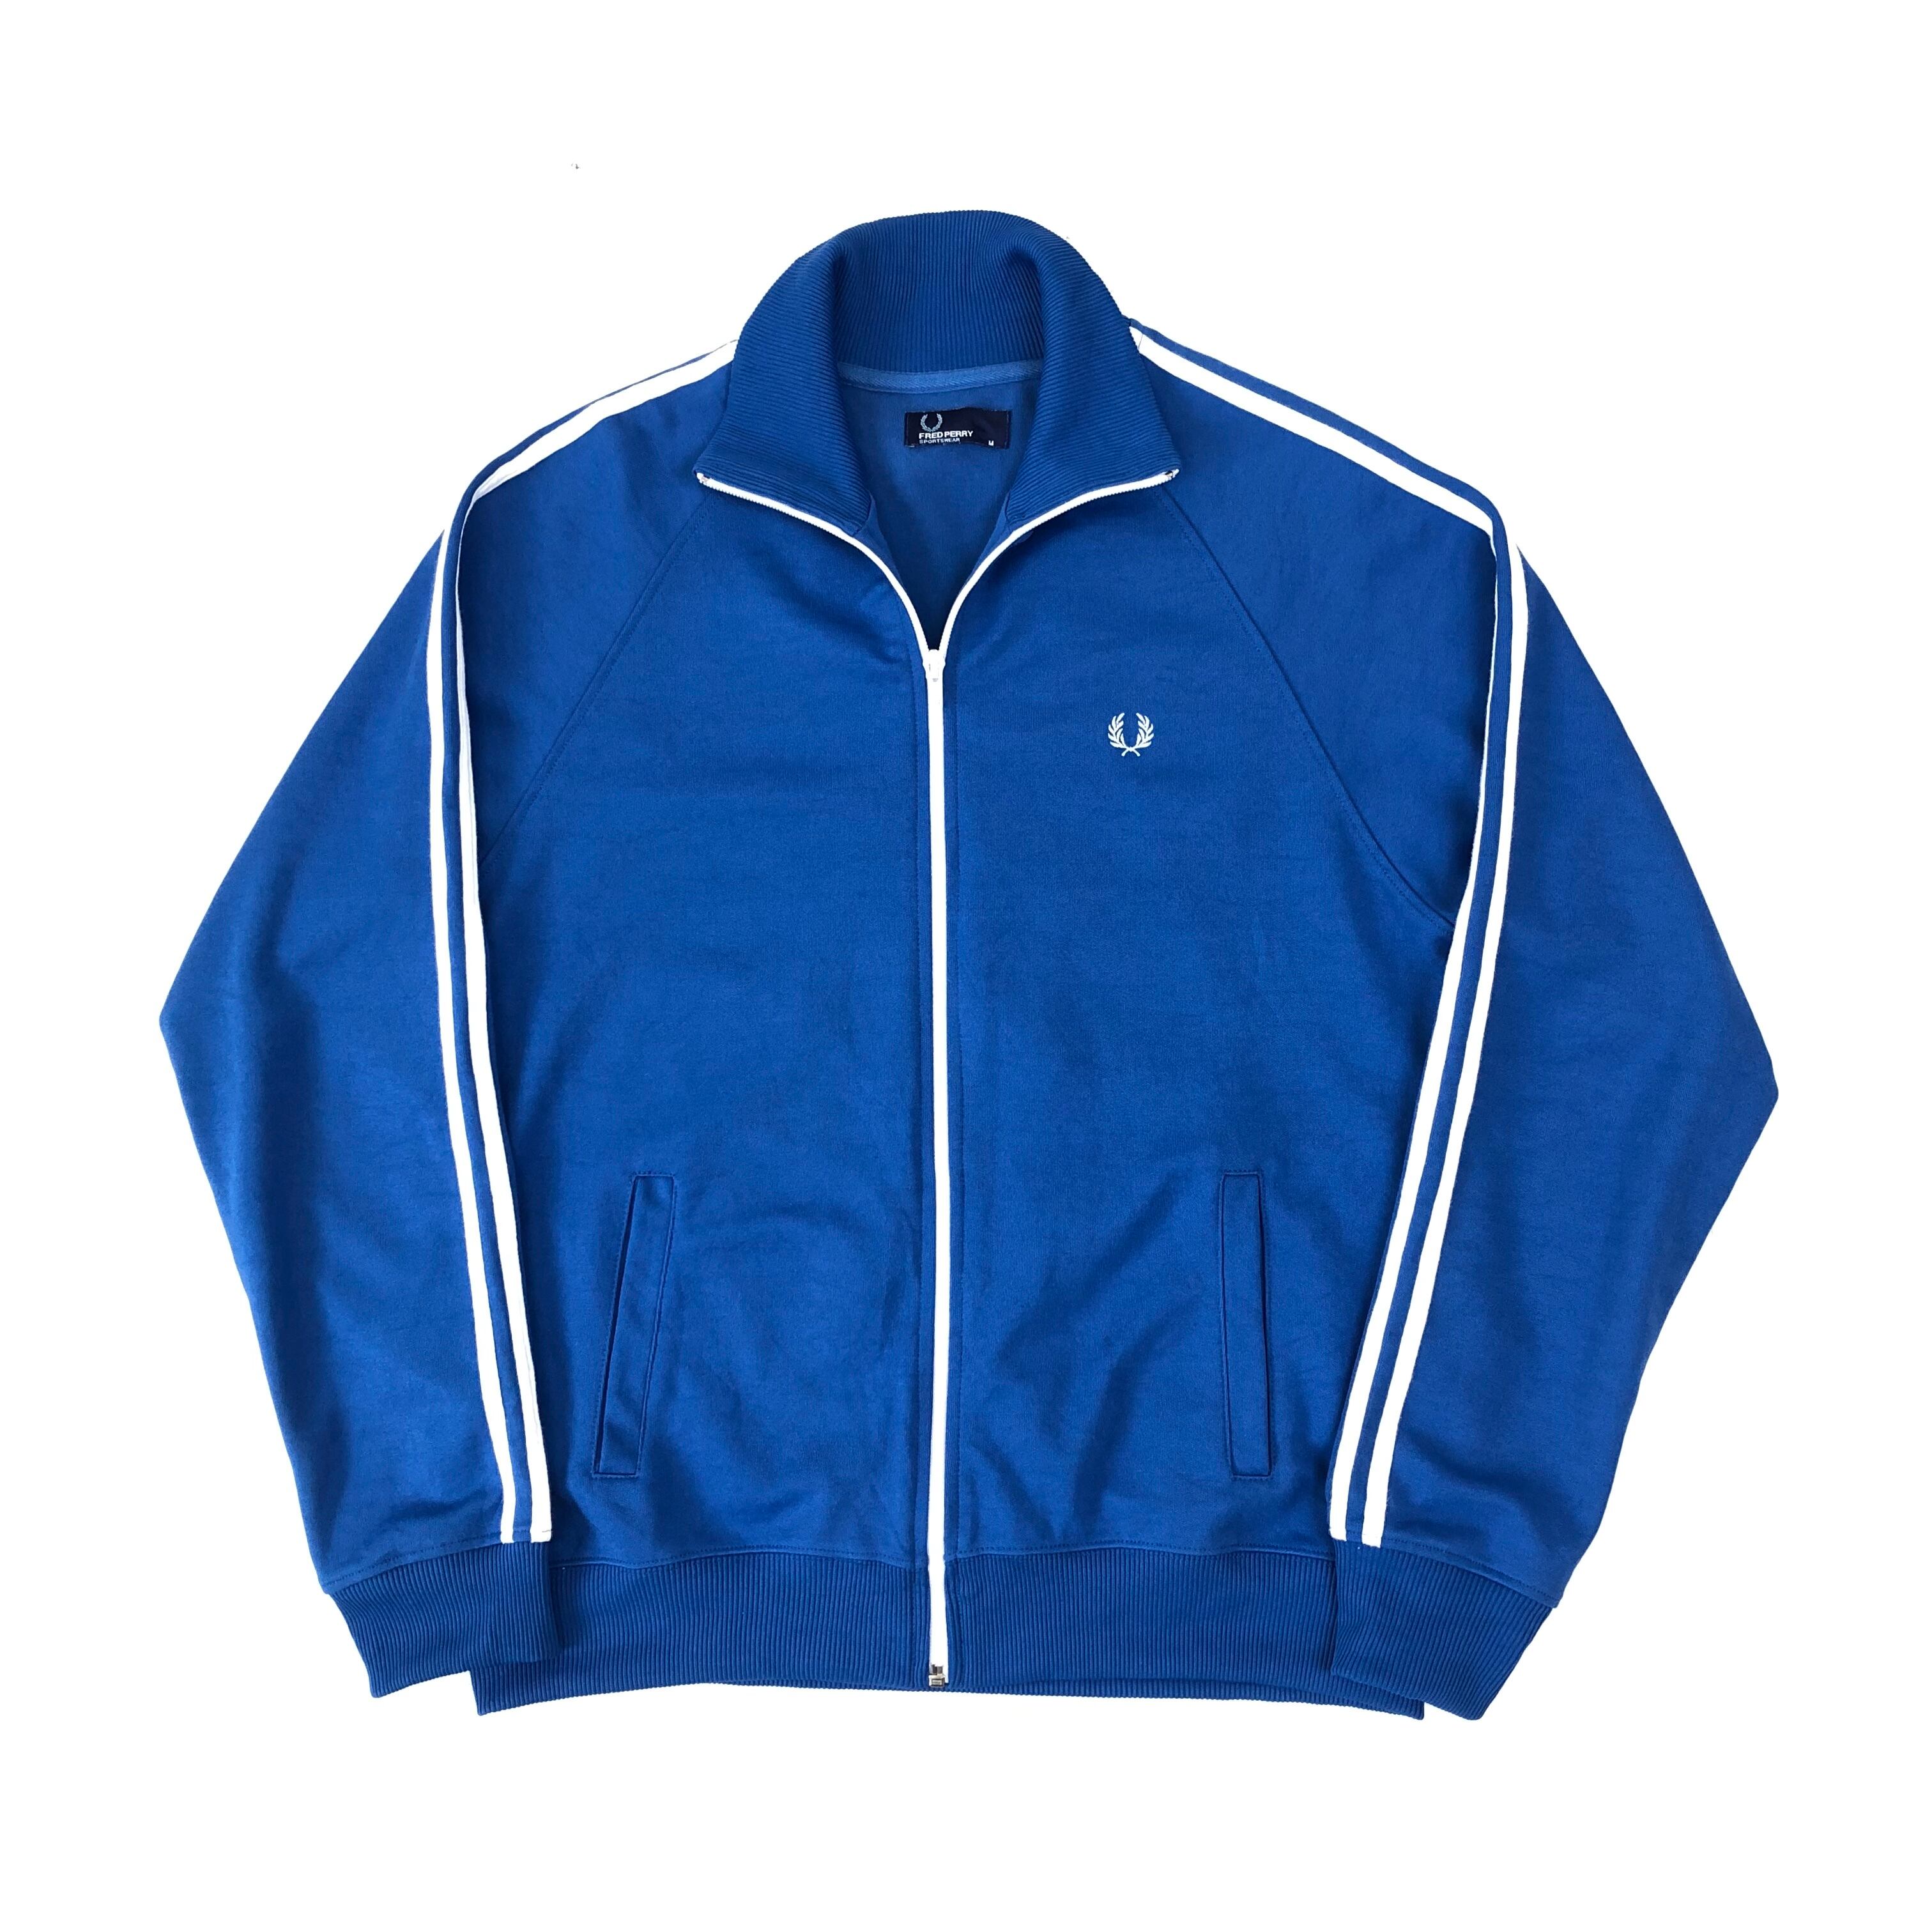 0380 / FRED PERRY jersey track jacket ブルー トラックジャケット ...